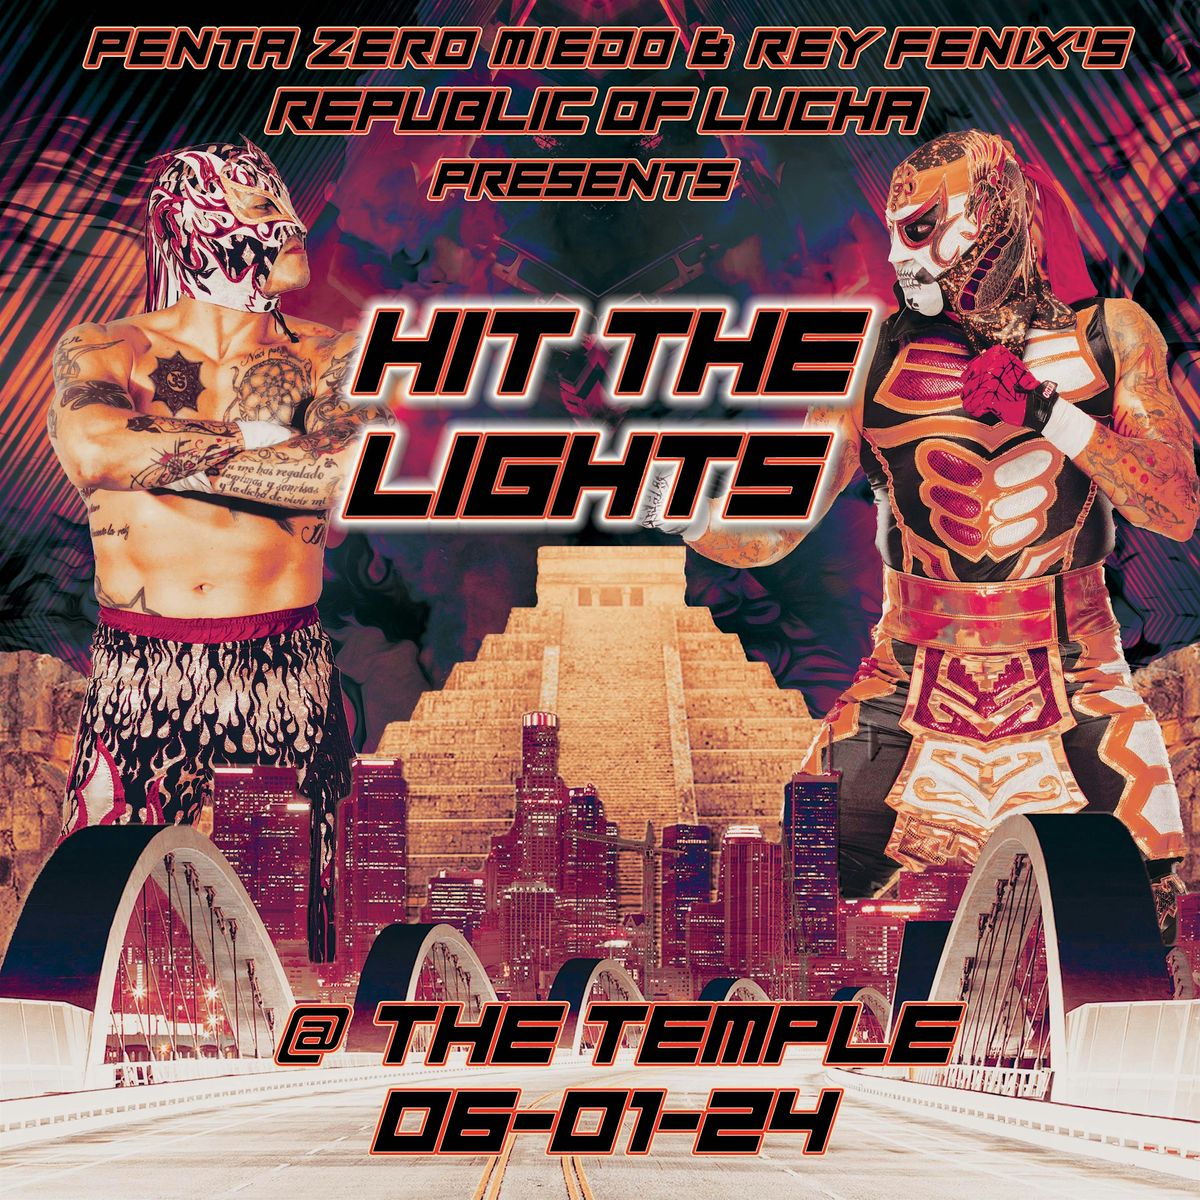 ROL7: "HIT THE LIGHTS" by Republic of Lucha